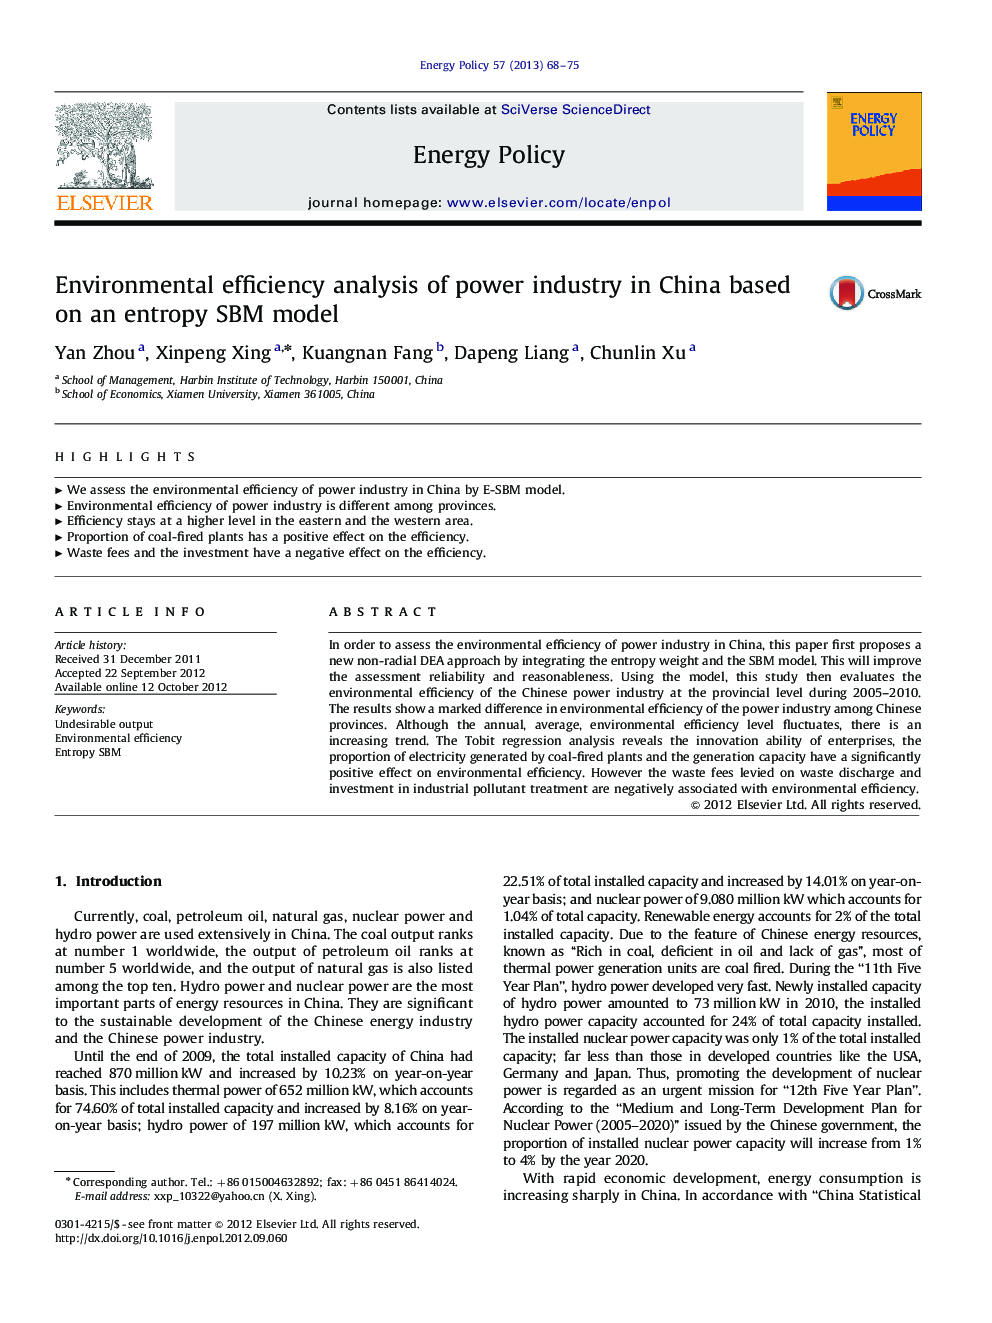 Environmental efficiency analysis of power industry in China based on an entropy SBM model